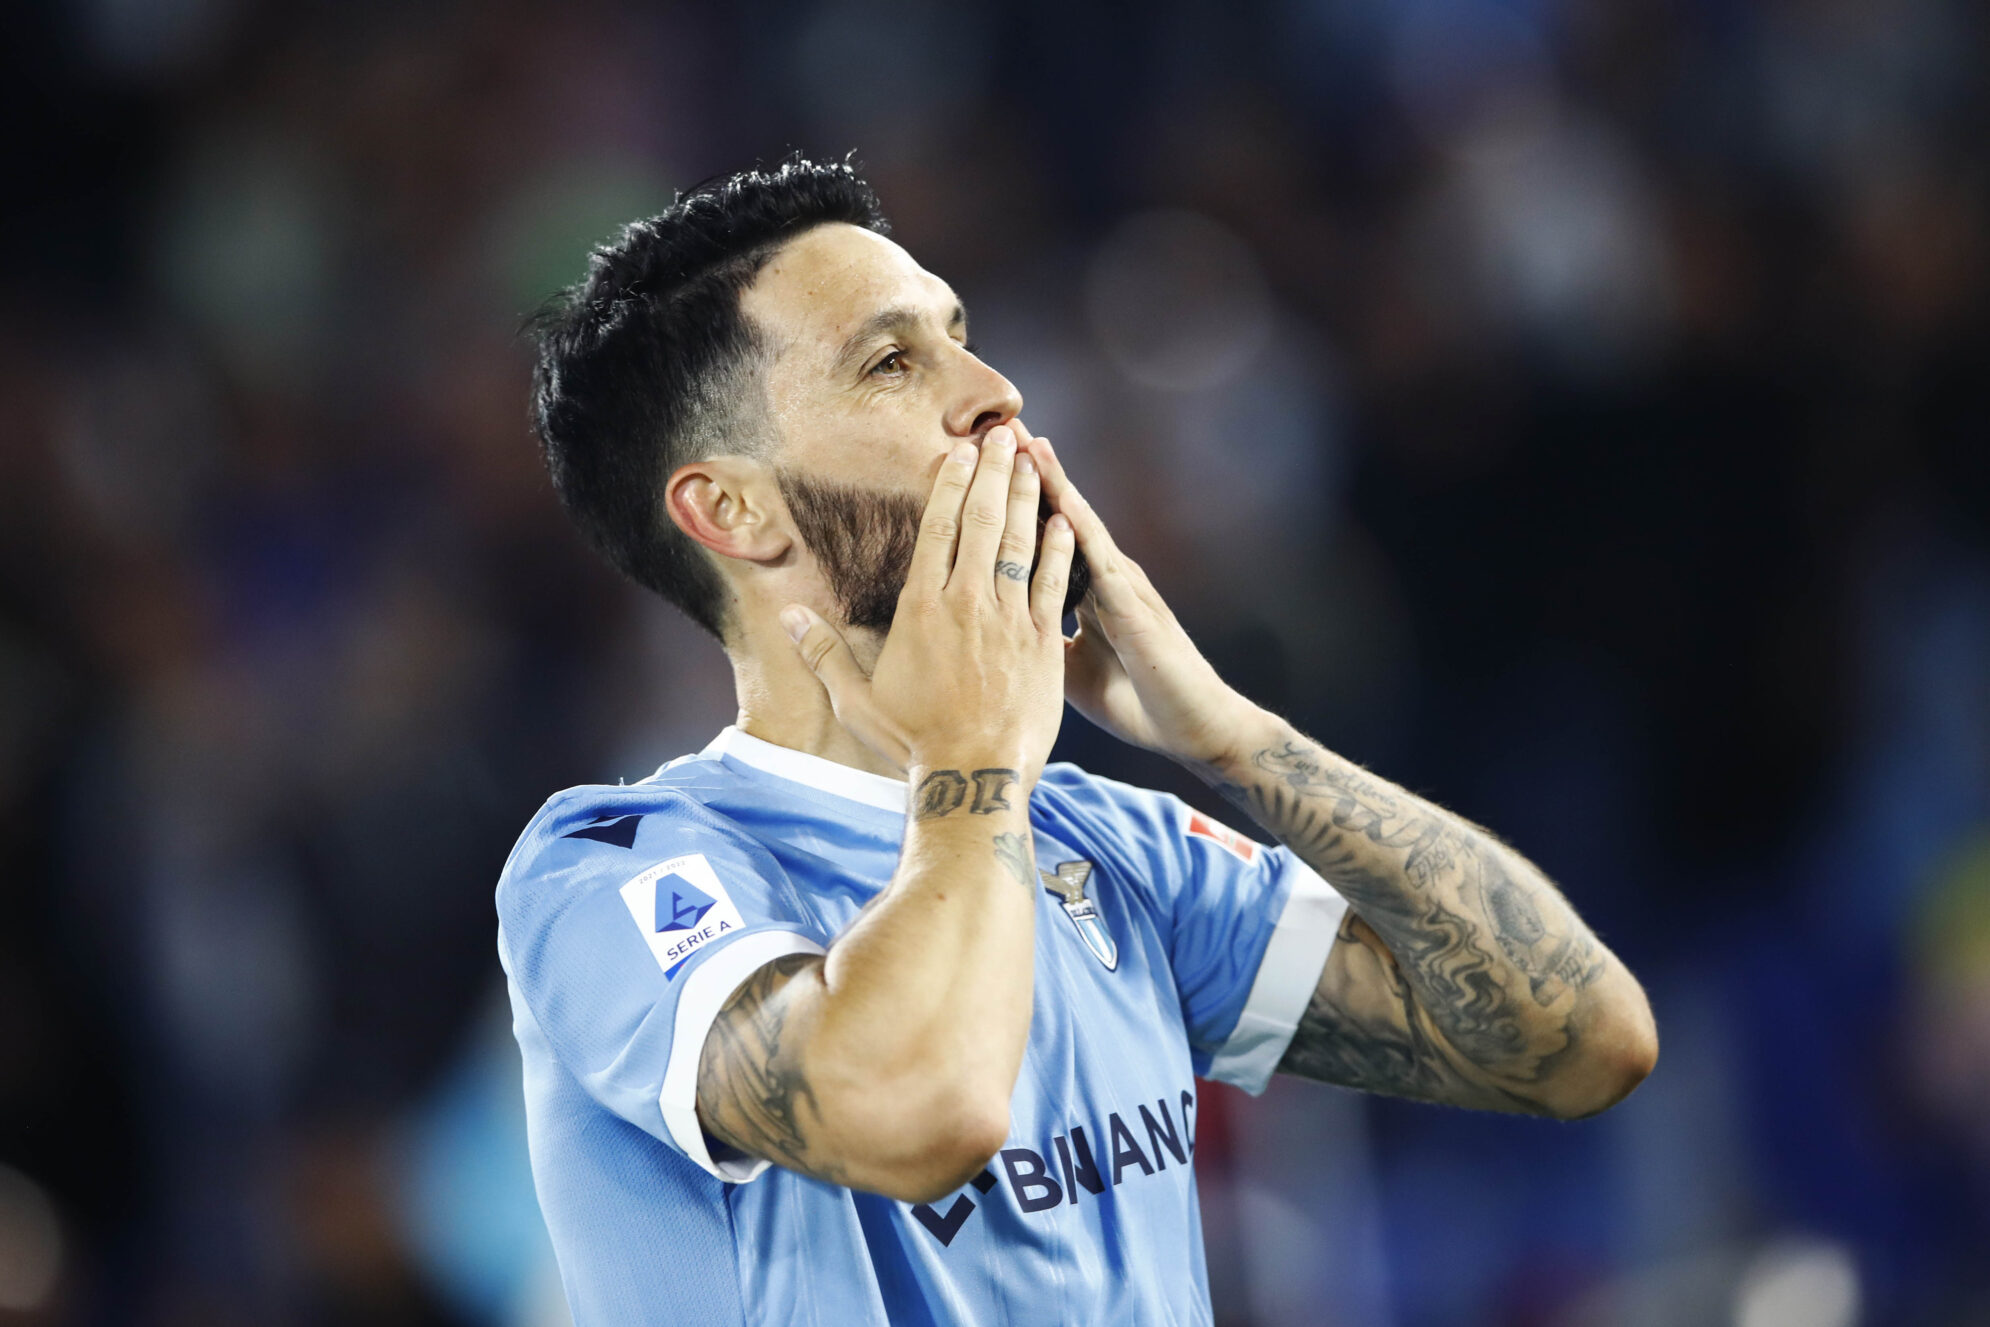 Should Other Serie A Teams Try to Sign Luis Alberto?